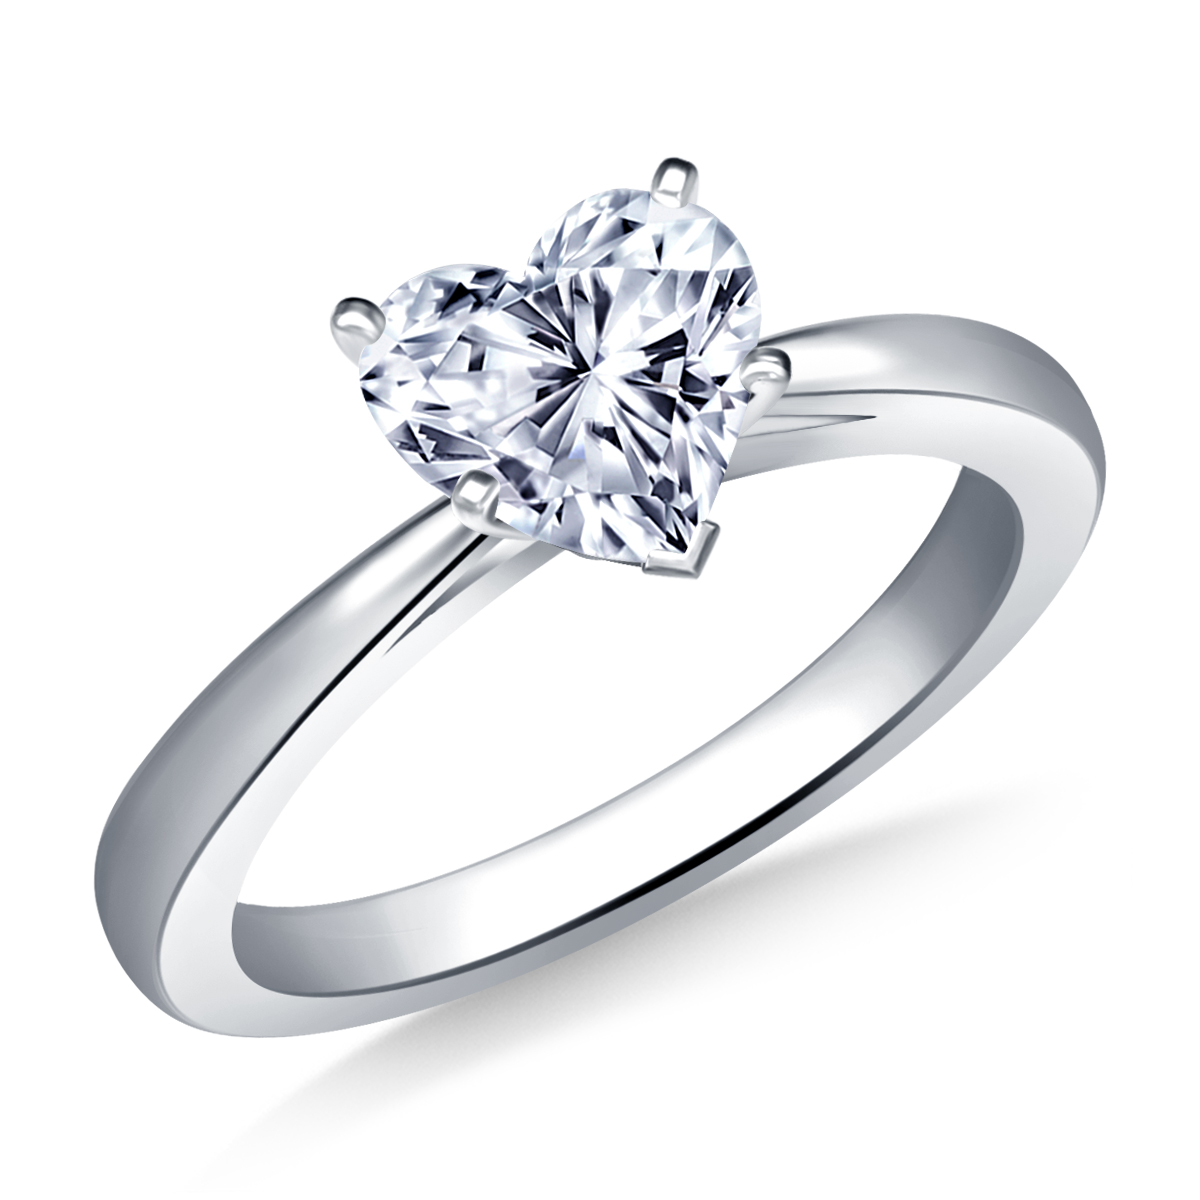 Reverse Tapered Classic Solitaire Diamond Engagement Ring in 14K White Gold (1.9 mm)